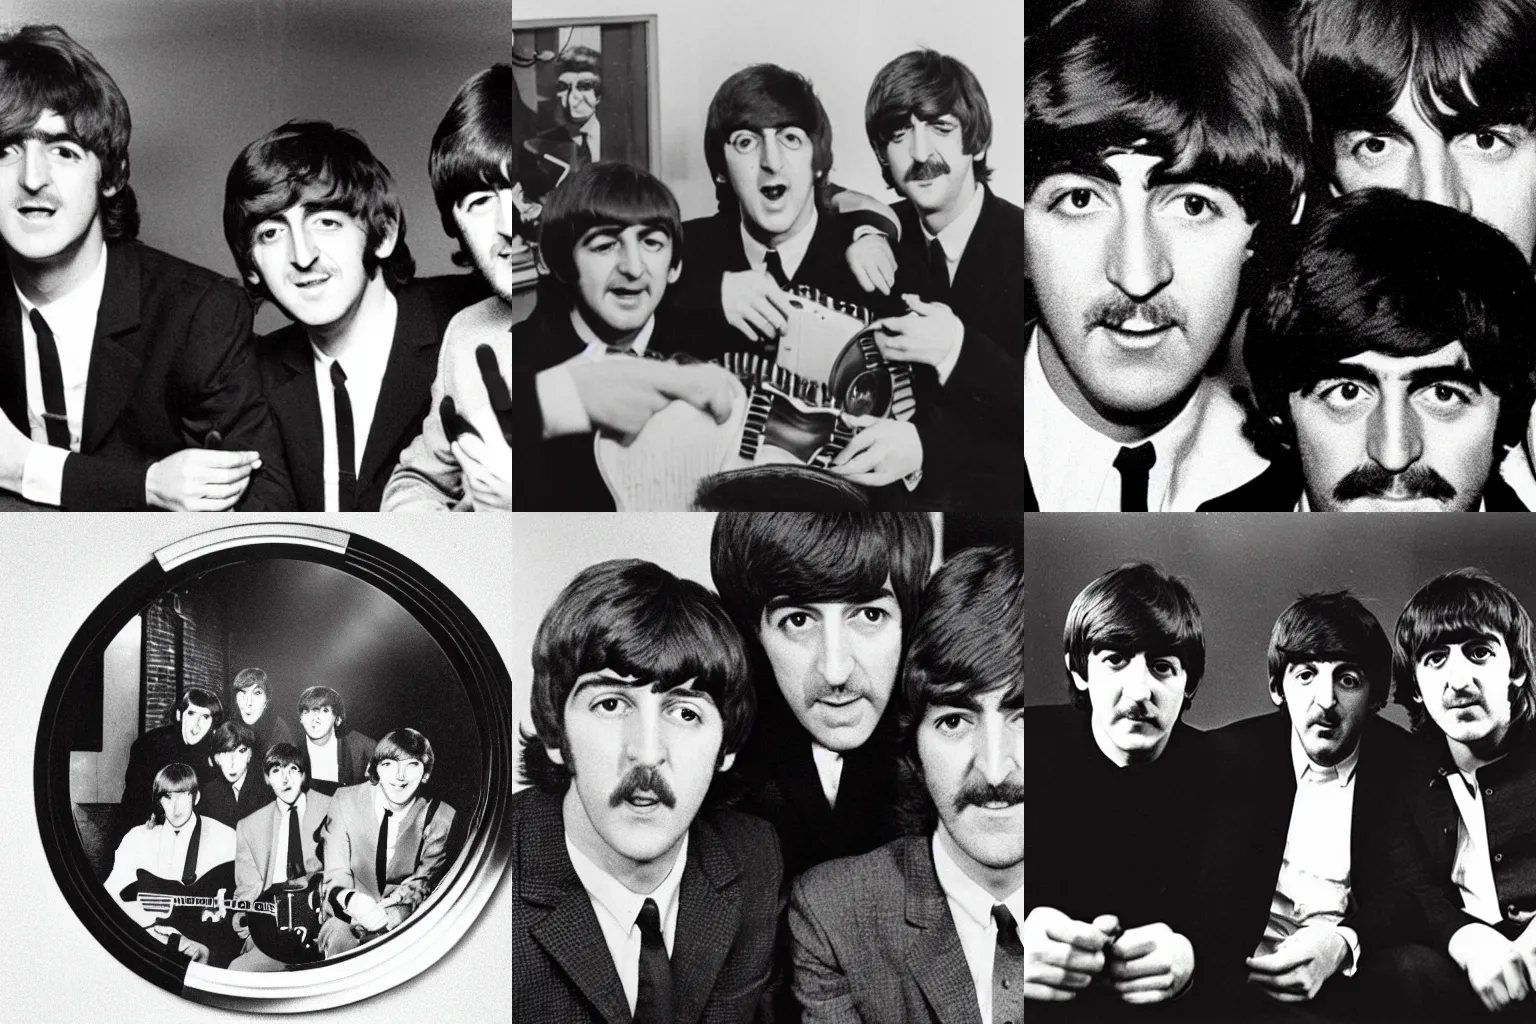 Prompt: Close-up photograph of The Beatles lost record